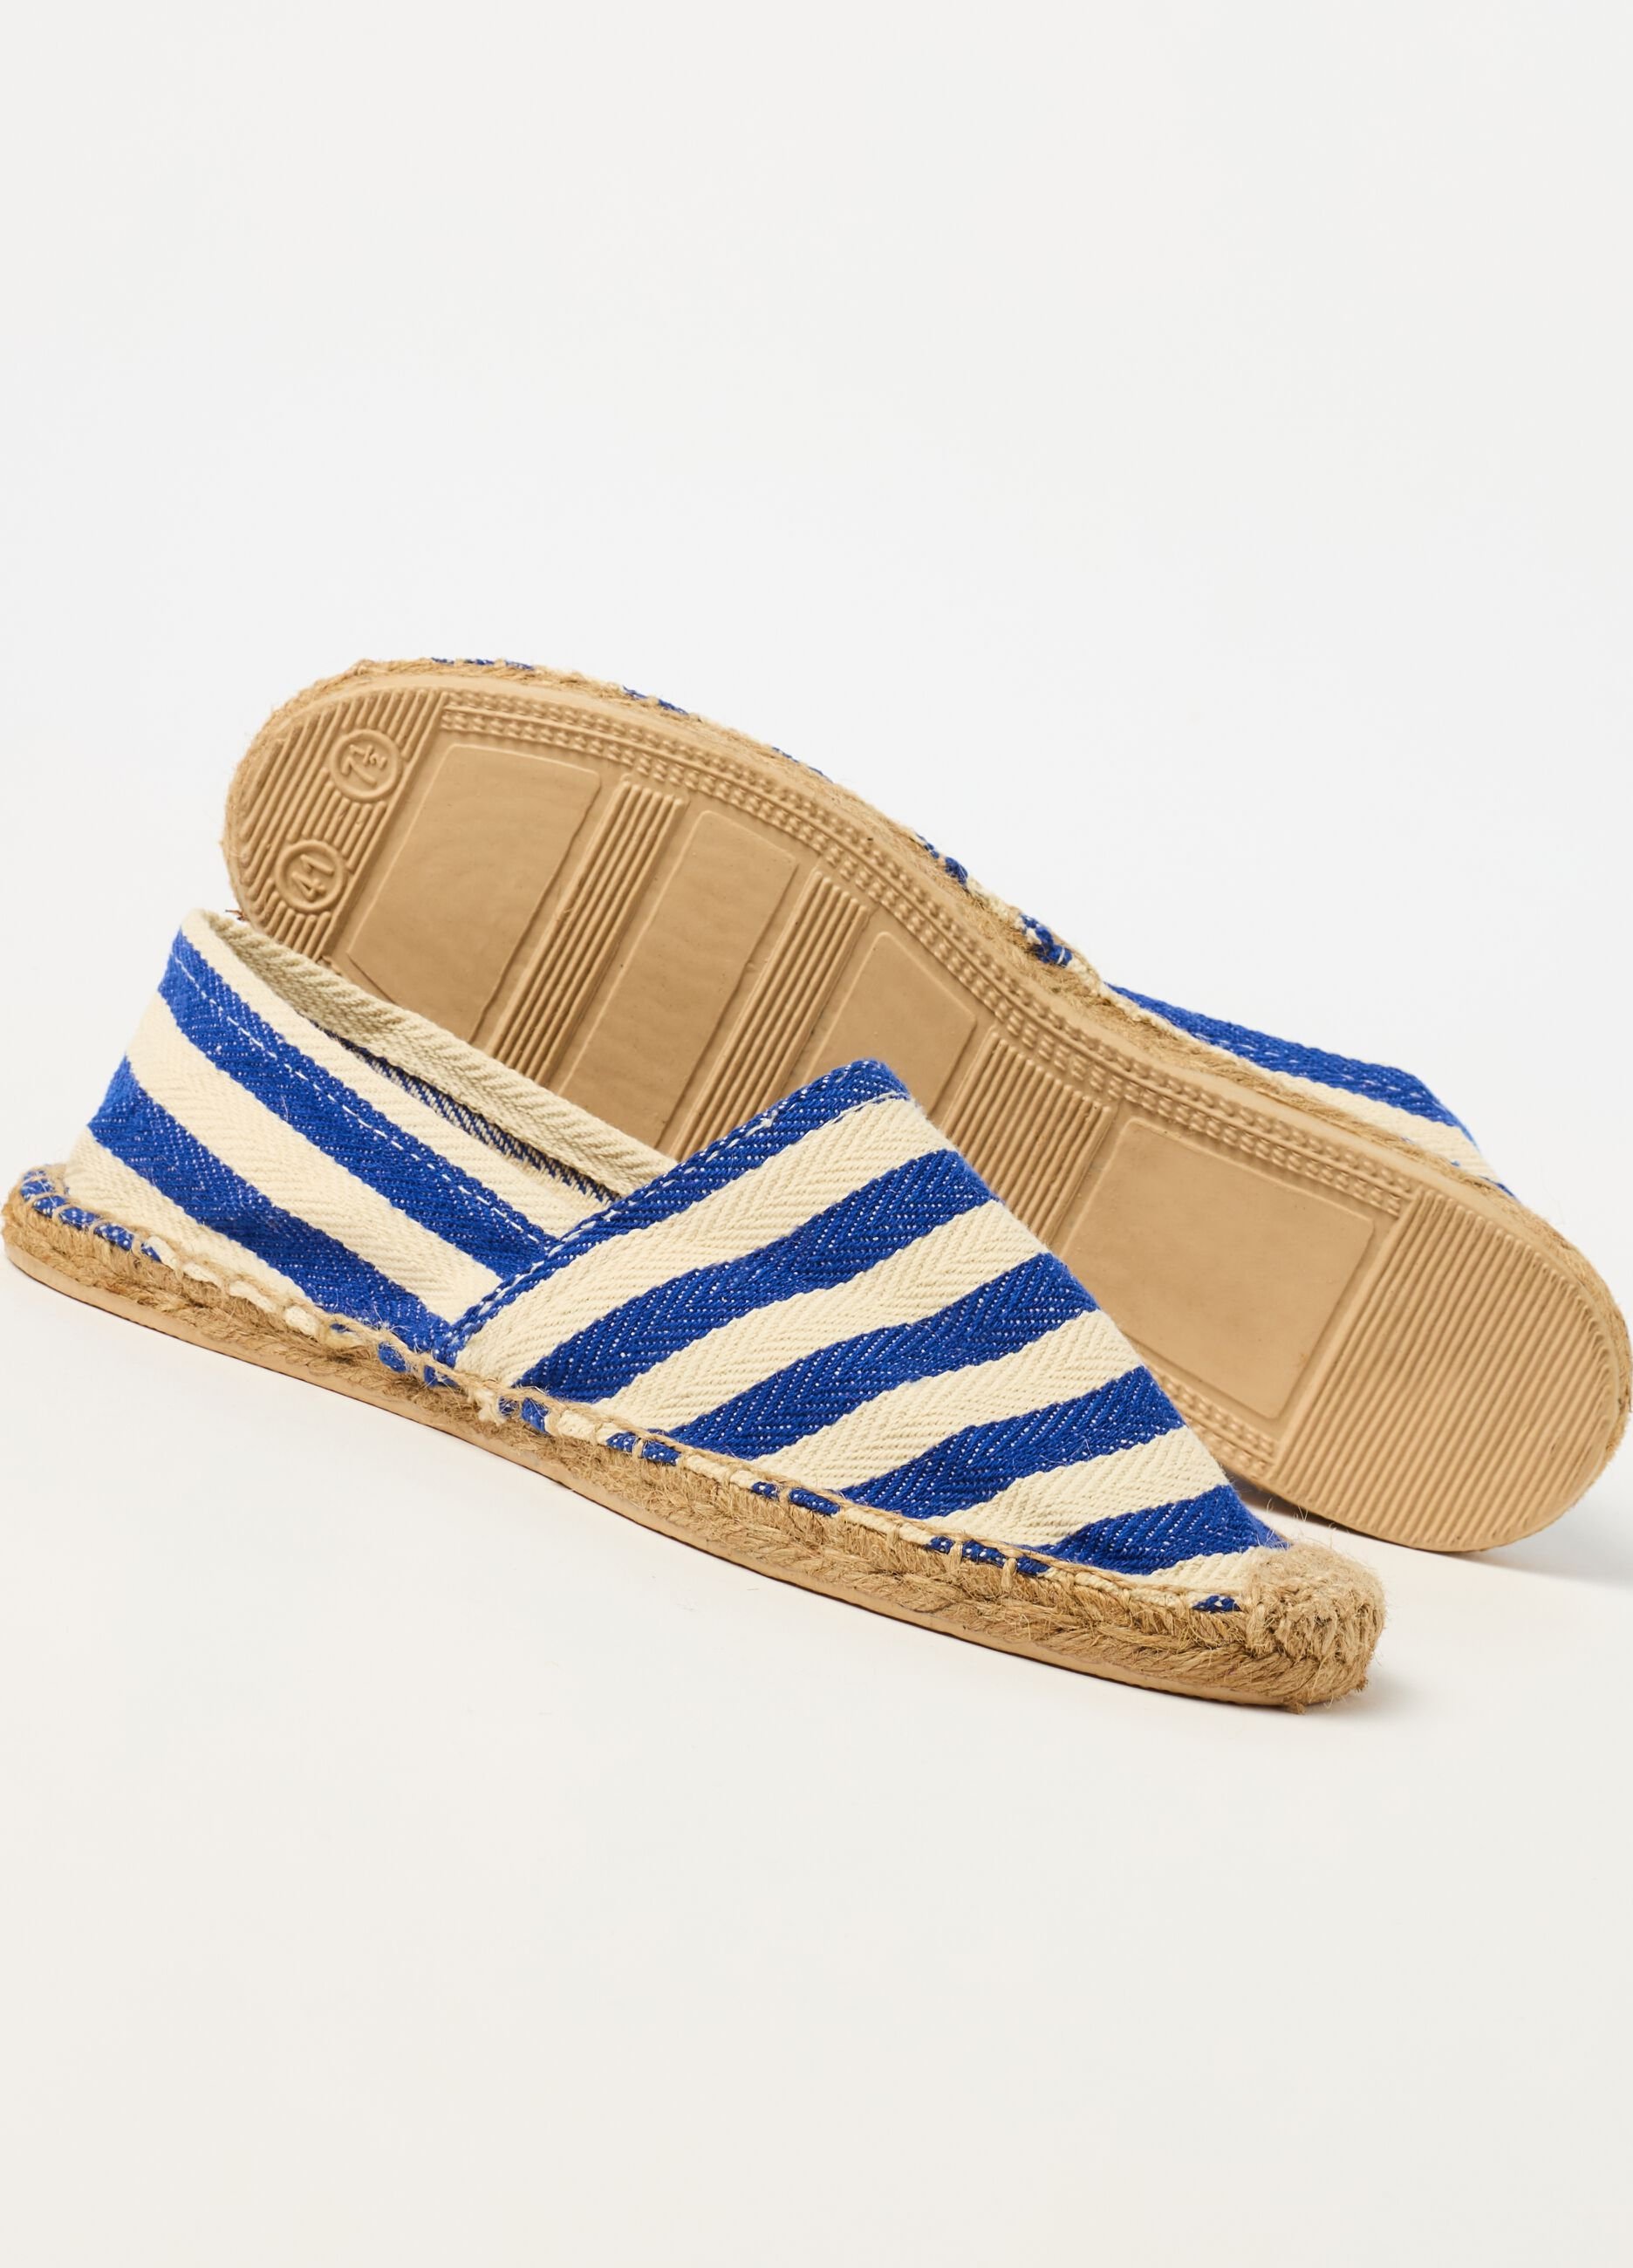 Espadrilles with striped pattern